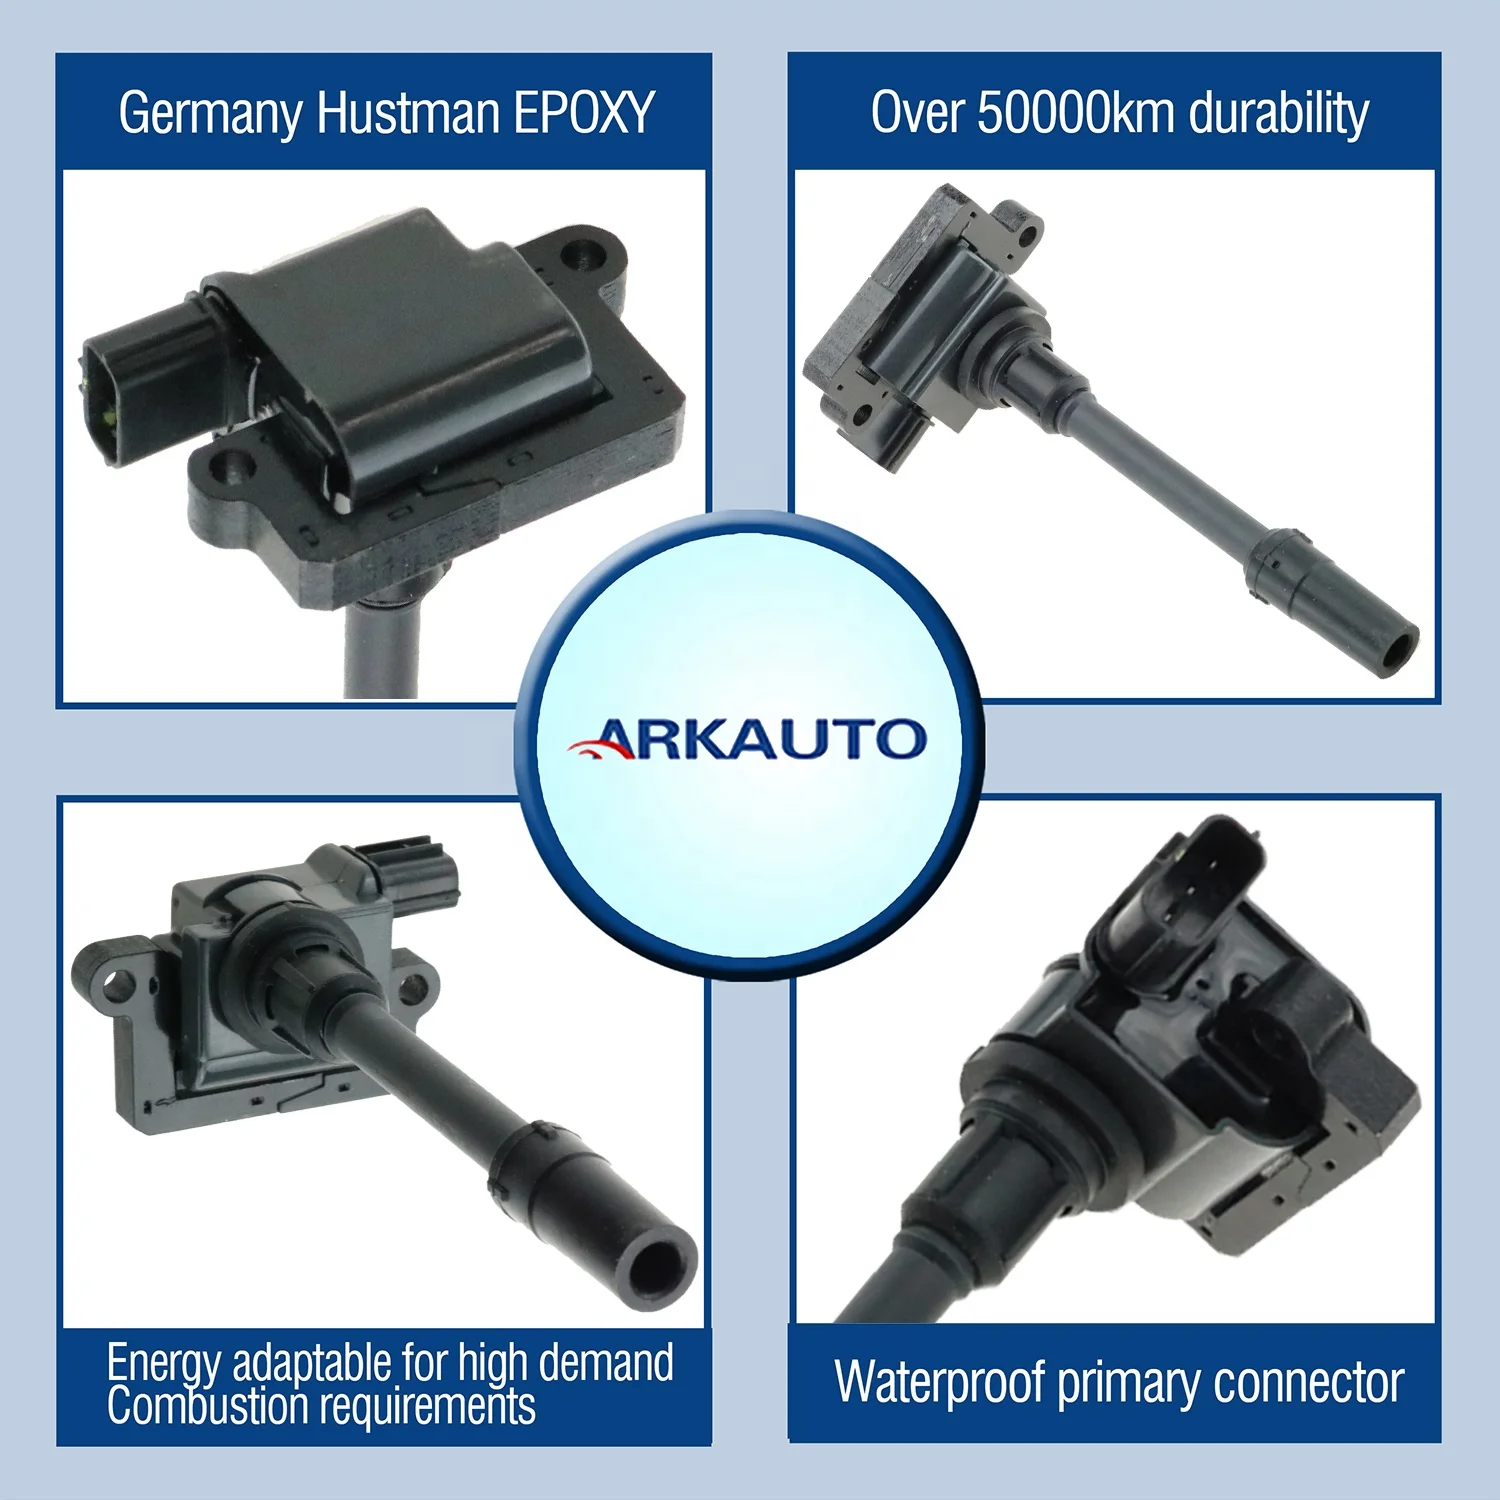 IGNITION COIL MD362915 MD348947 MD355008 H6T12372 H6T12272 8530419 For  MITSUBISHI Galant Grandis Lancer Space Runner Wagon 4G94| Alibaba.com